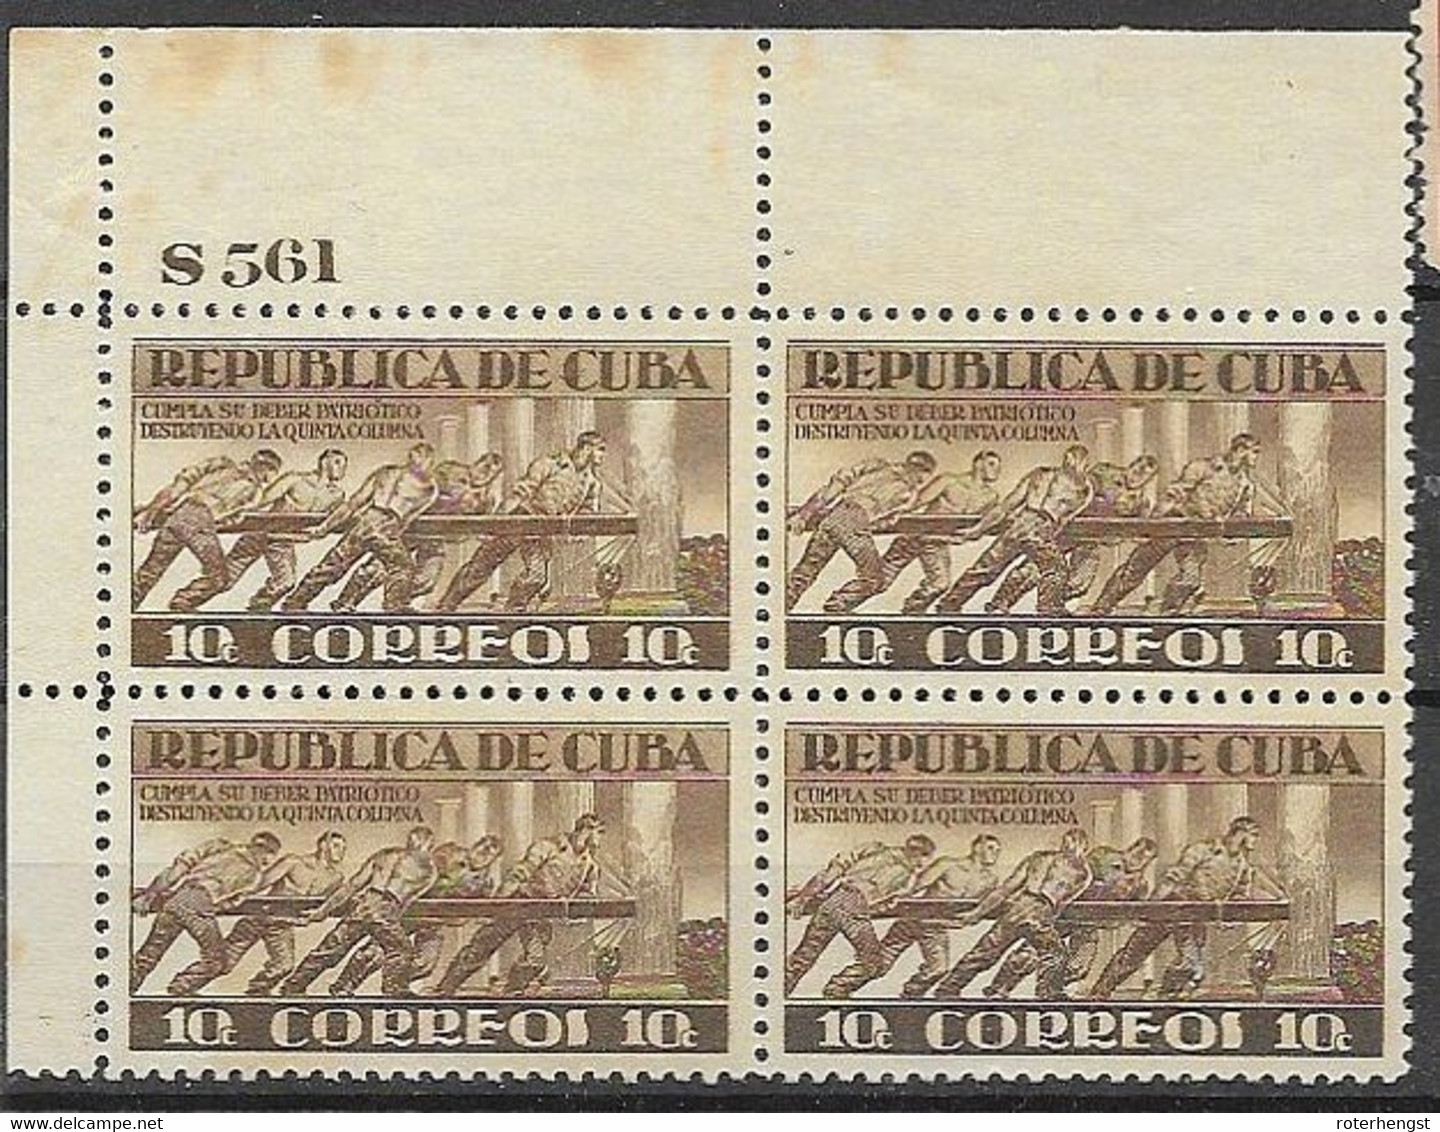 Cuba Mnh ** With Plate Number (stain Only On Border, Stamps Fine) 1943 About 30 Euros - Nuovi